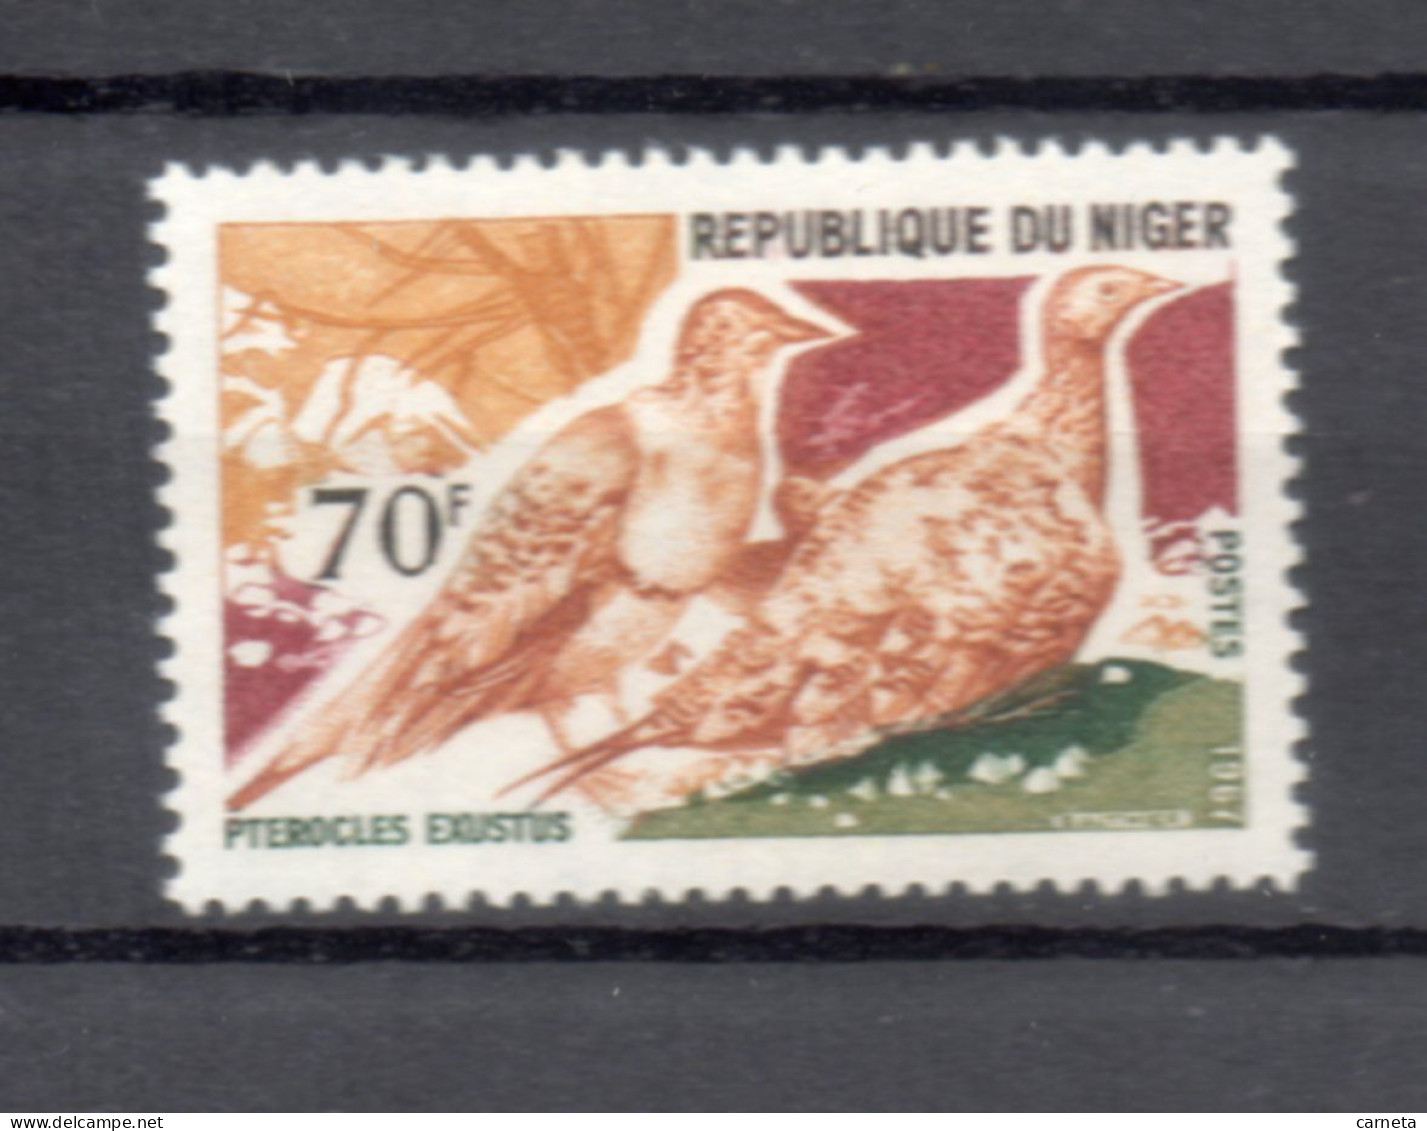 NIGER   N° 215    NEUF SANS CHARNIERE  COTE 4.00€    OISEAUX ANIMAUX FAUNE - Niger (1960-...)